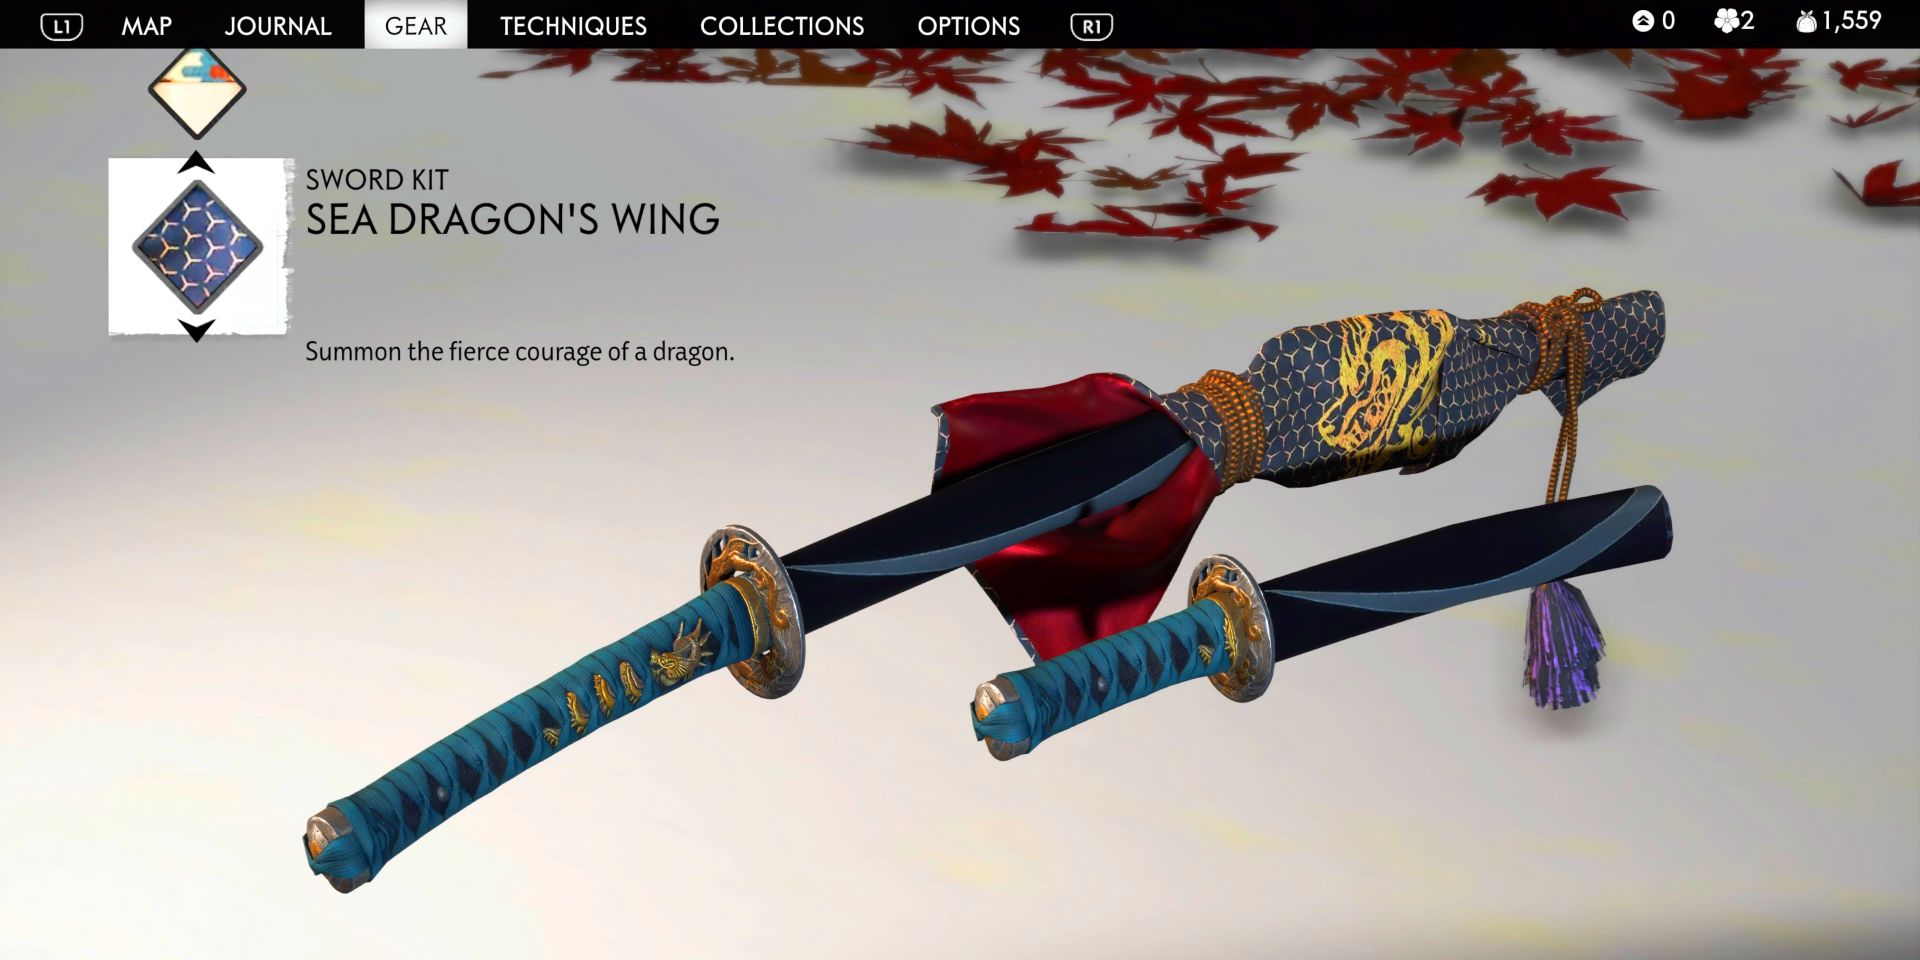 dark blue and black sword kit with a red and gold design on part of it resembling a dragon